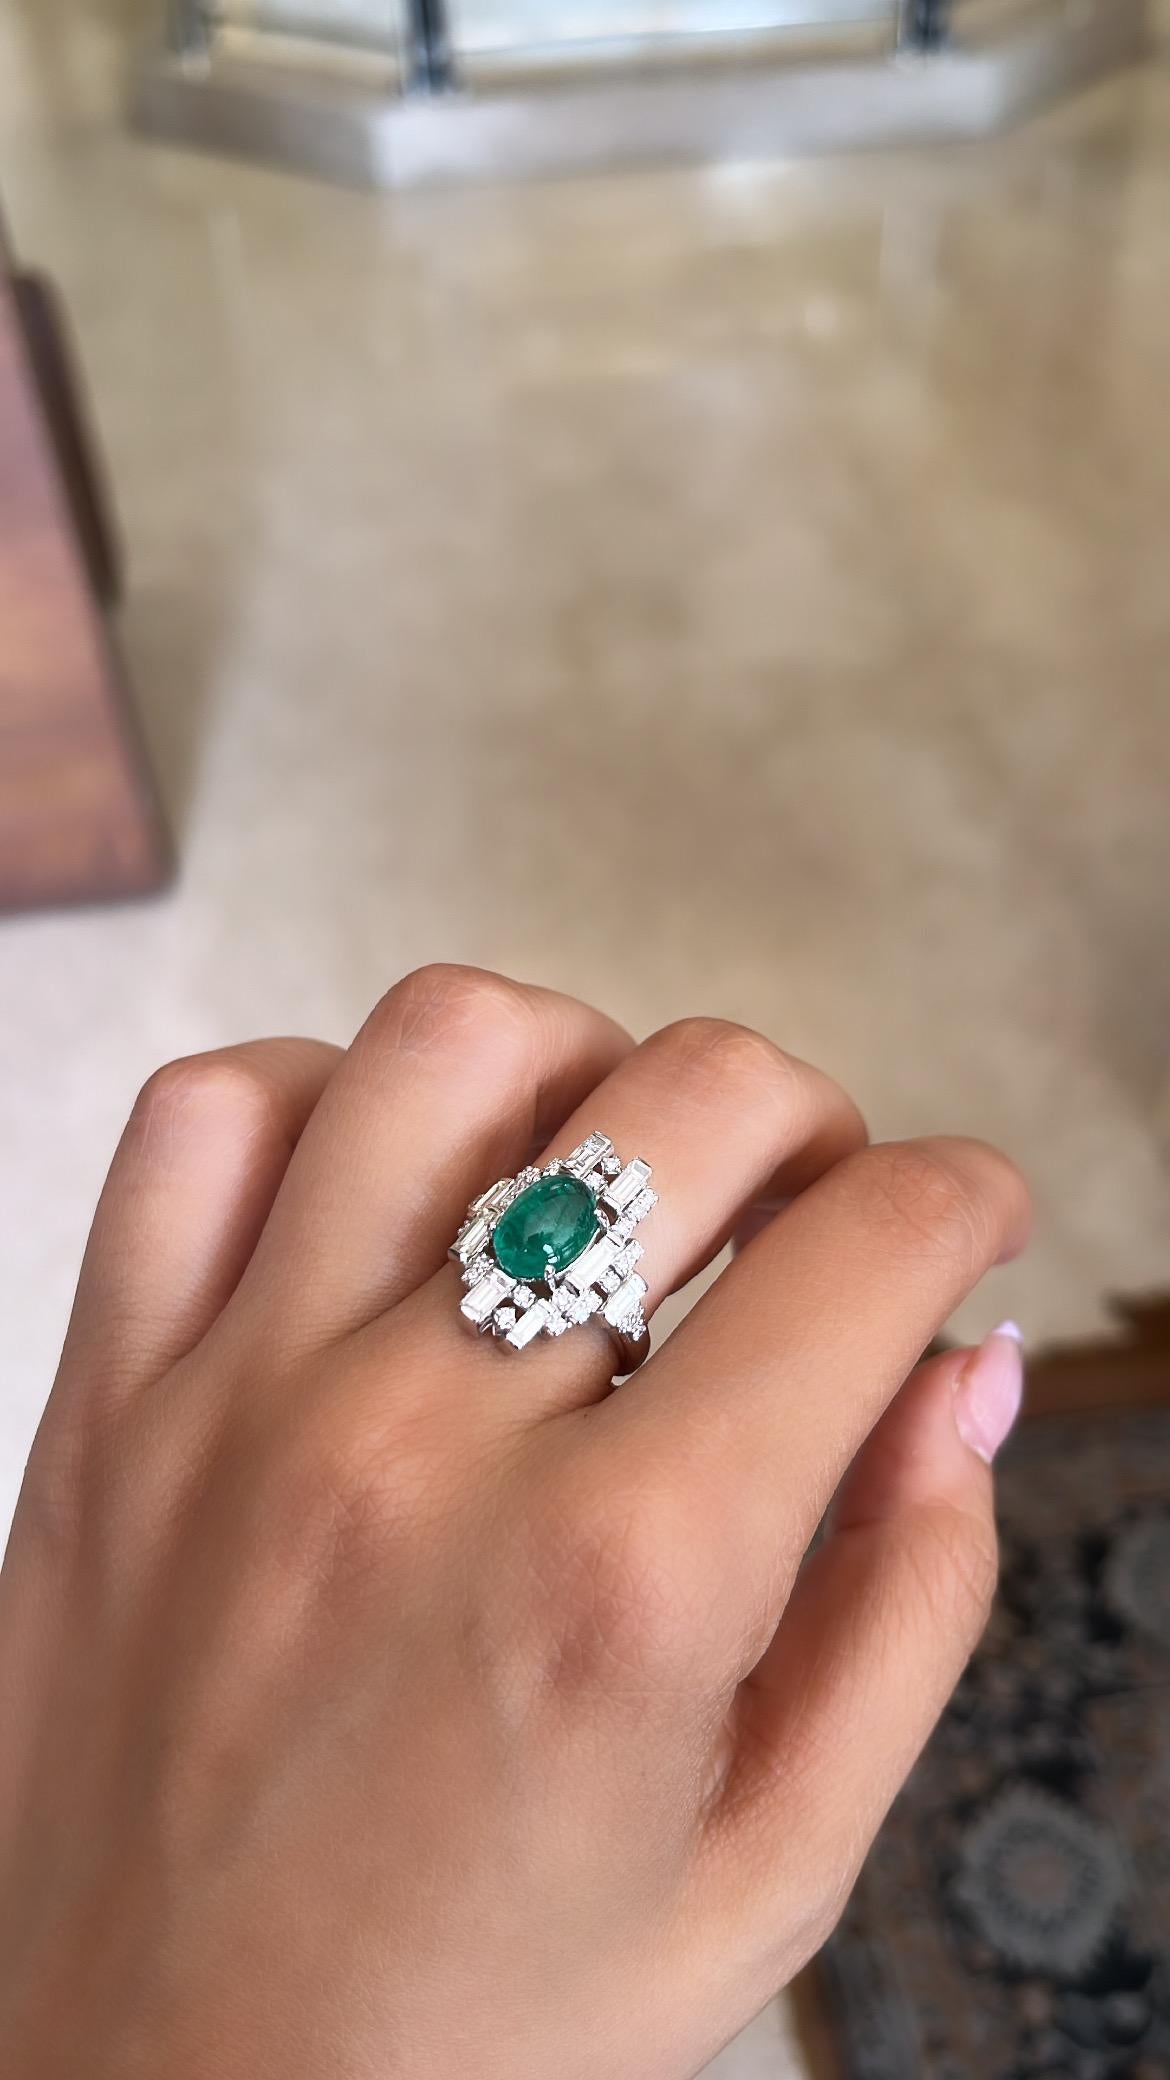 A very beautiful and one of a kind, Emerald Cabochon Engagement Ring set in 18K White Gold & Diamonds. The weight of the Emerald Cabochon is 2.61 carats. The Emerald is completely natural, without any treatment and is of Zambian origin. The combined